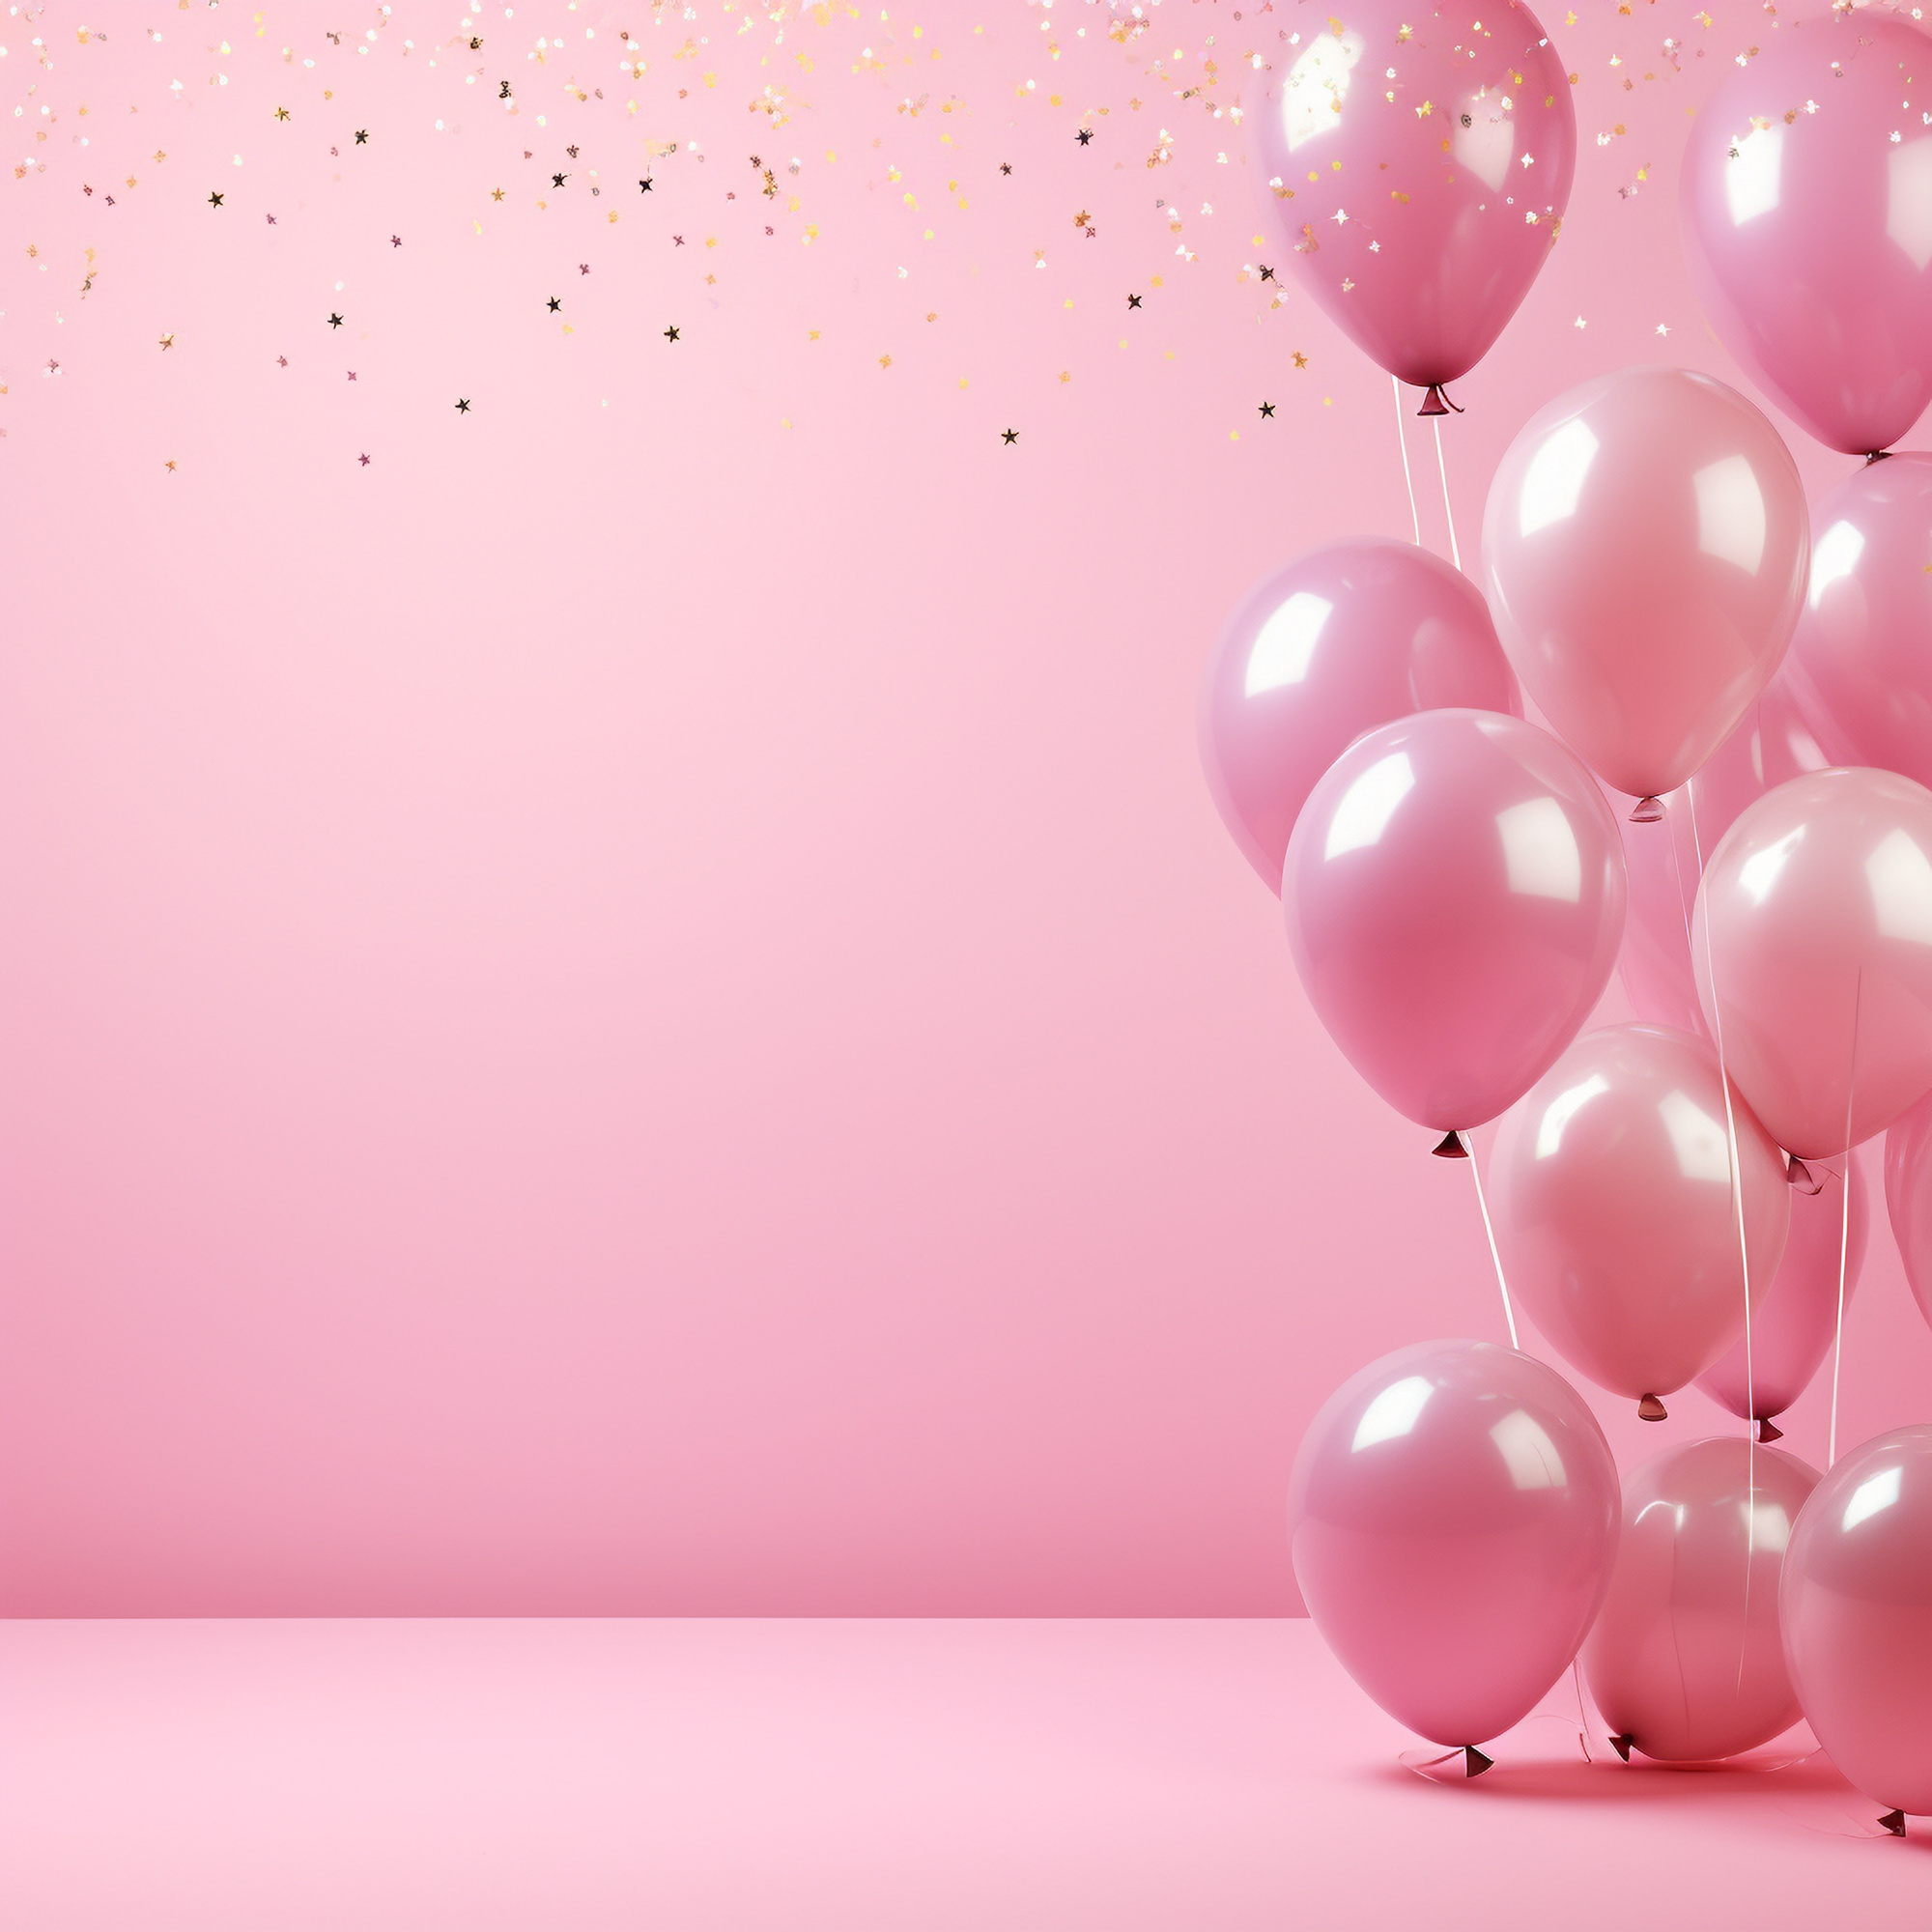 Pink balloons and confetti on pastel background